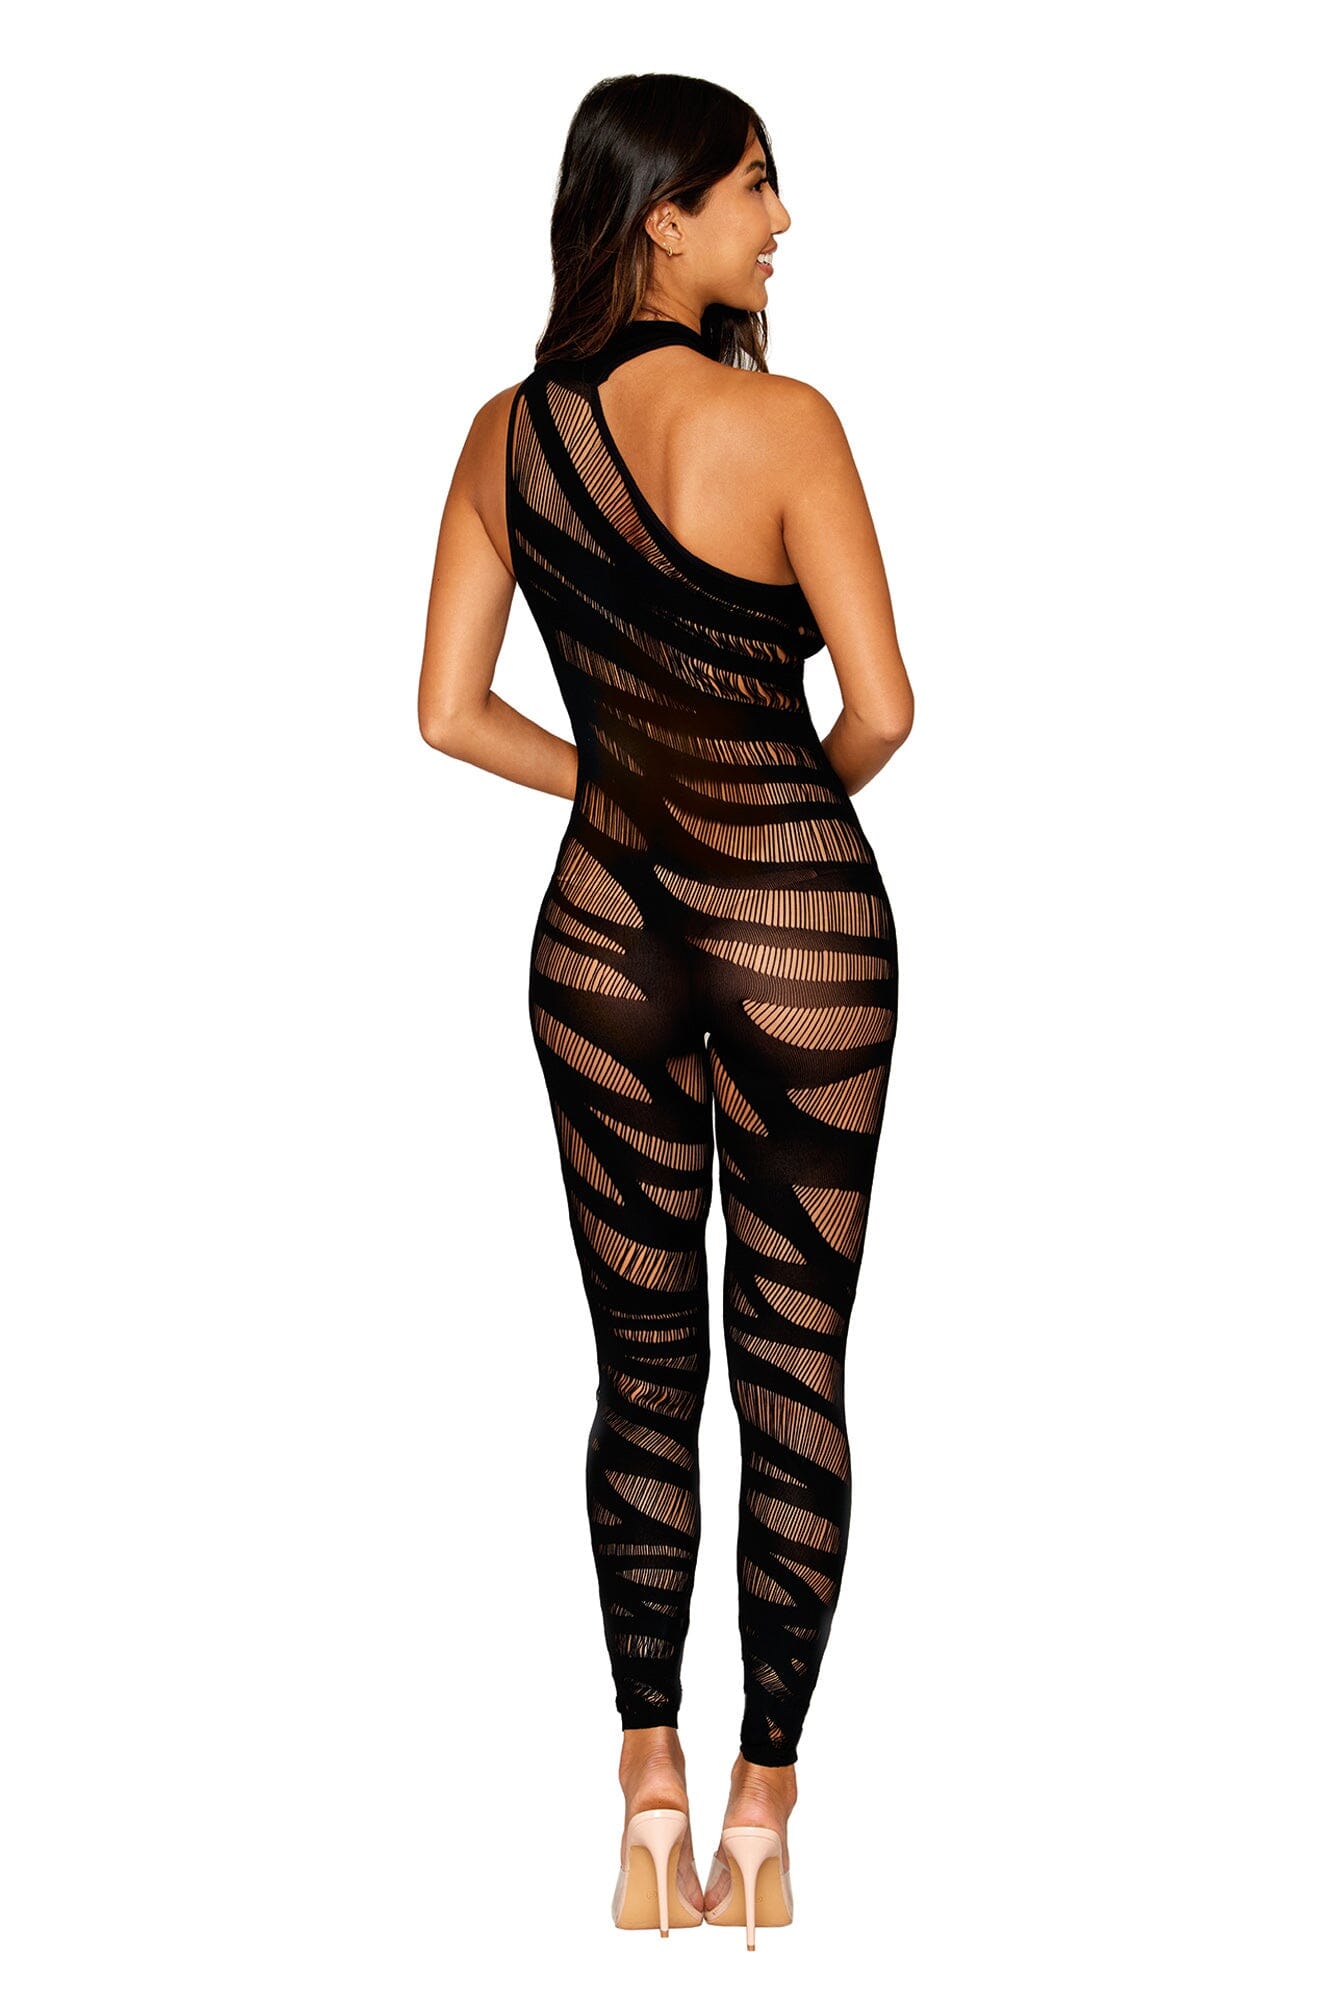 Dreamgirl Asymmetrical Opaque Knitted Bodystocking with All-Over Slash Design Detail Bodystocking Dreamgirl 